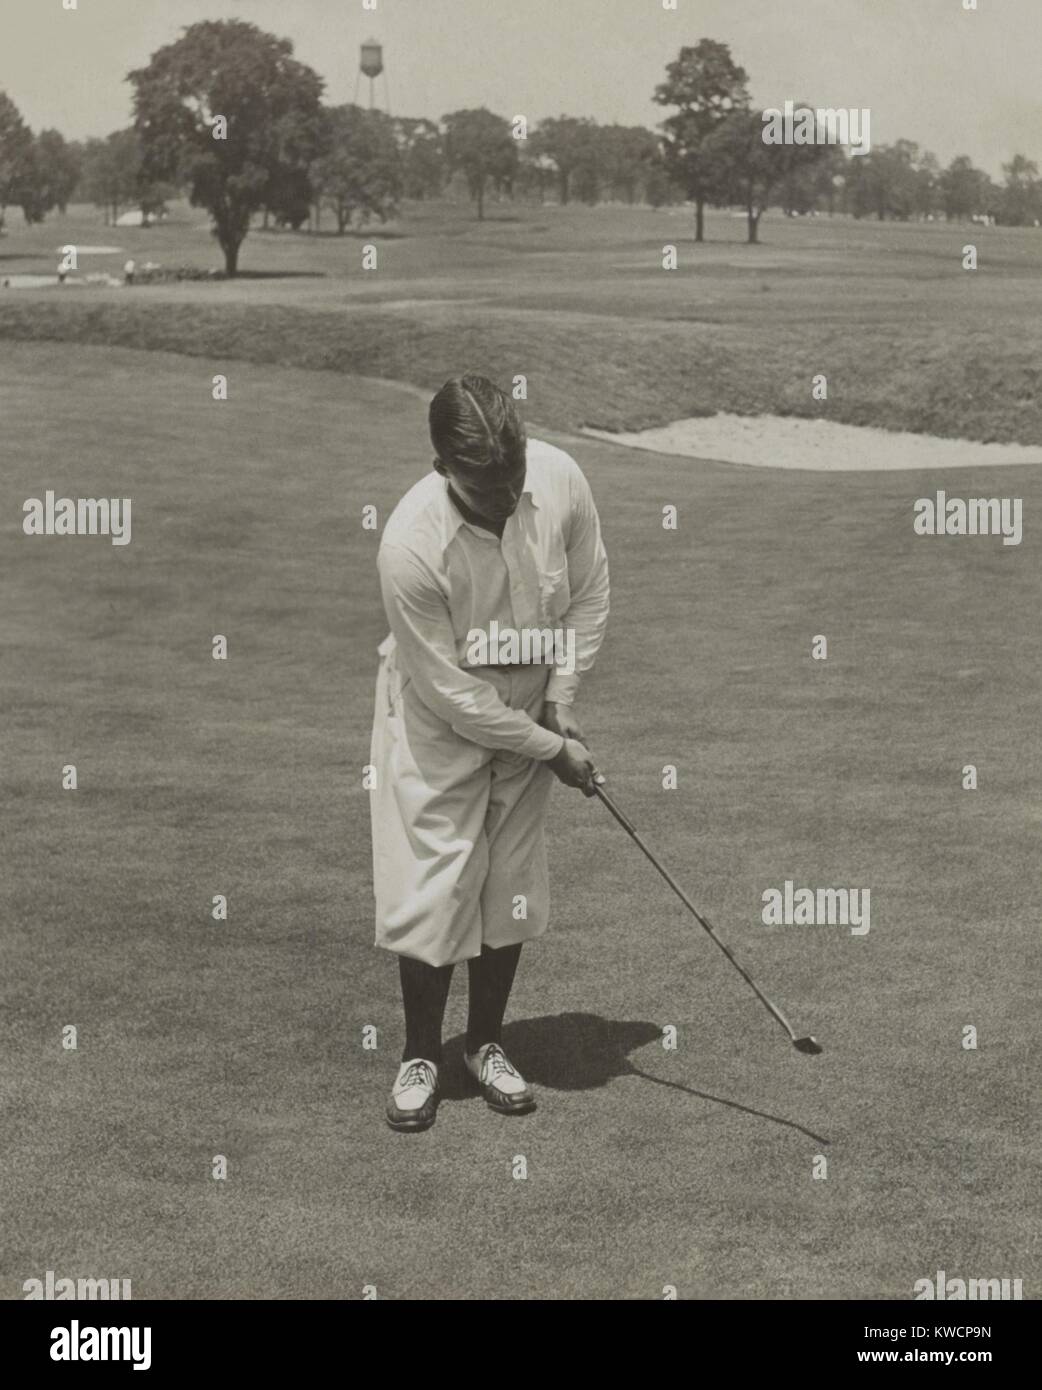 Bobby Jones, winner of 1929 National Open Golf Championship. He is sinking a putt with his famous putter, 'Calamity Jane'. - (BSLOC_2015_1_121) Stock Photo